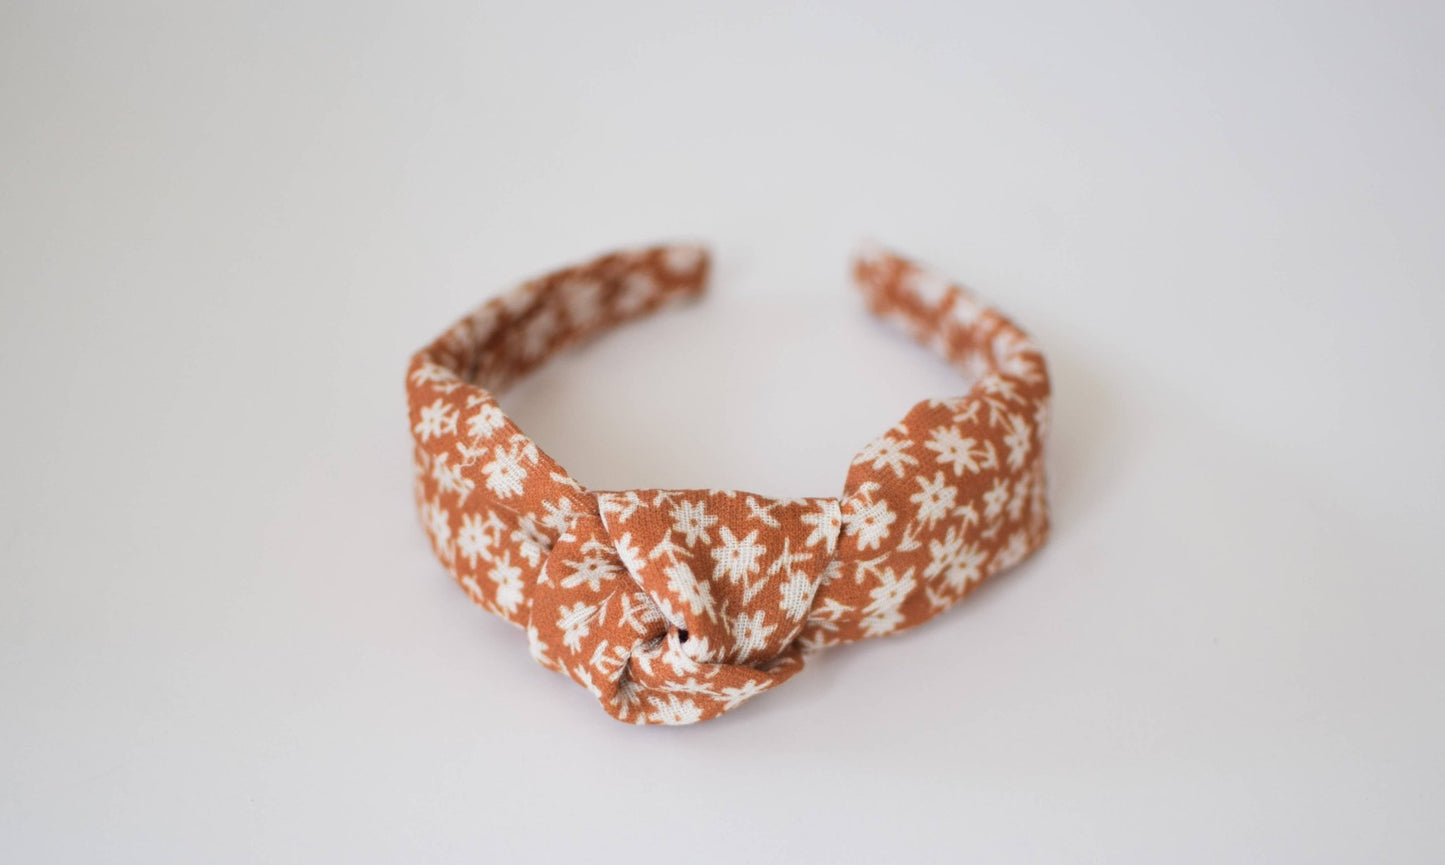 Ronni Blake & Co - Knotted Women's Headband So Floral Headband - Addie Rose Boutique - Austin